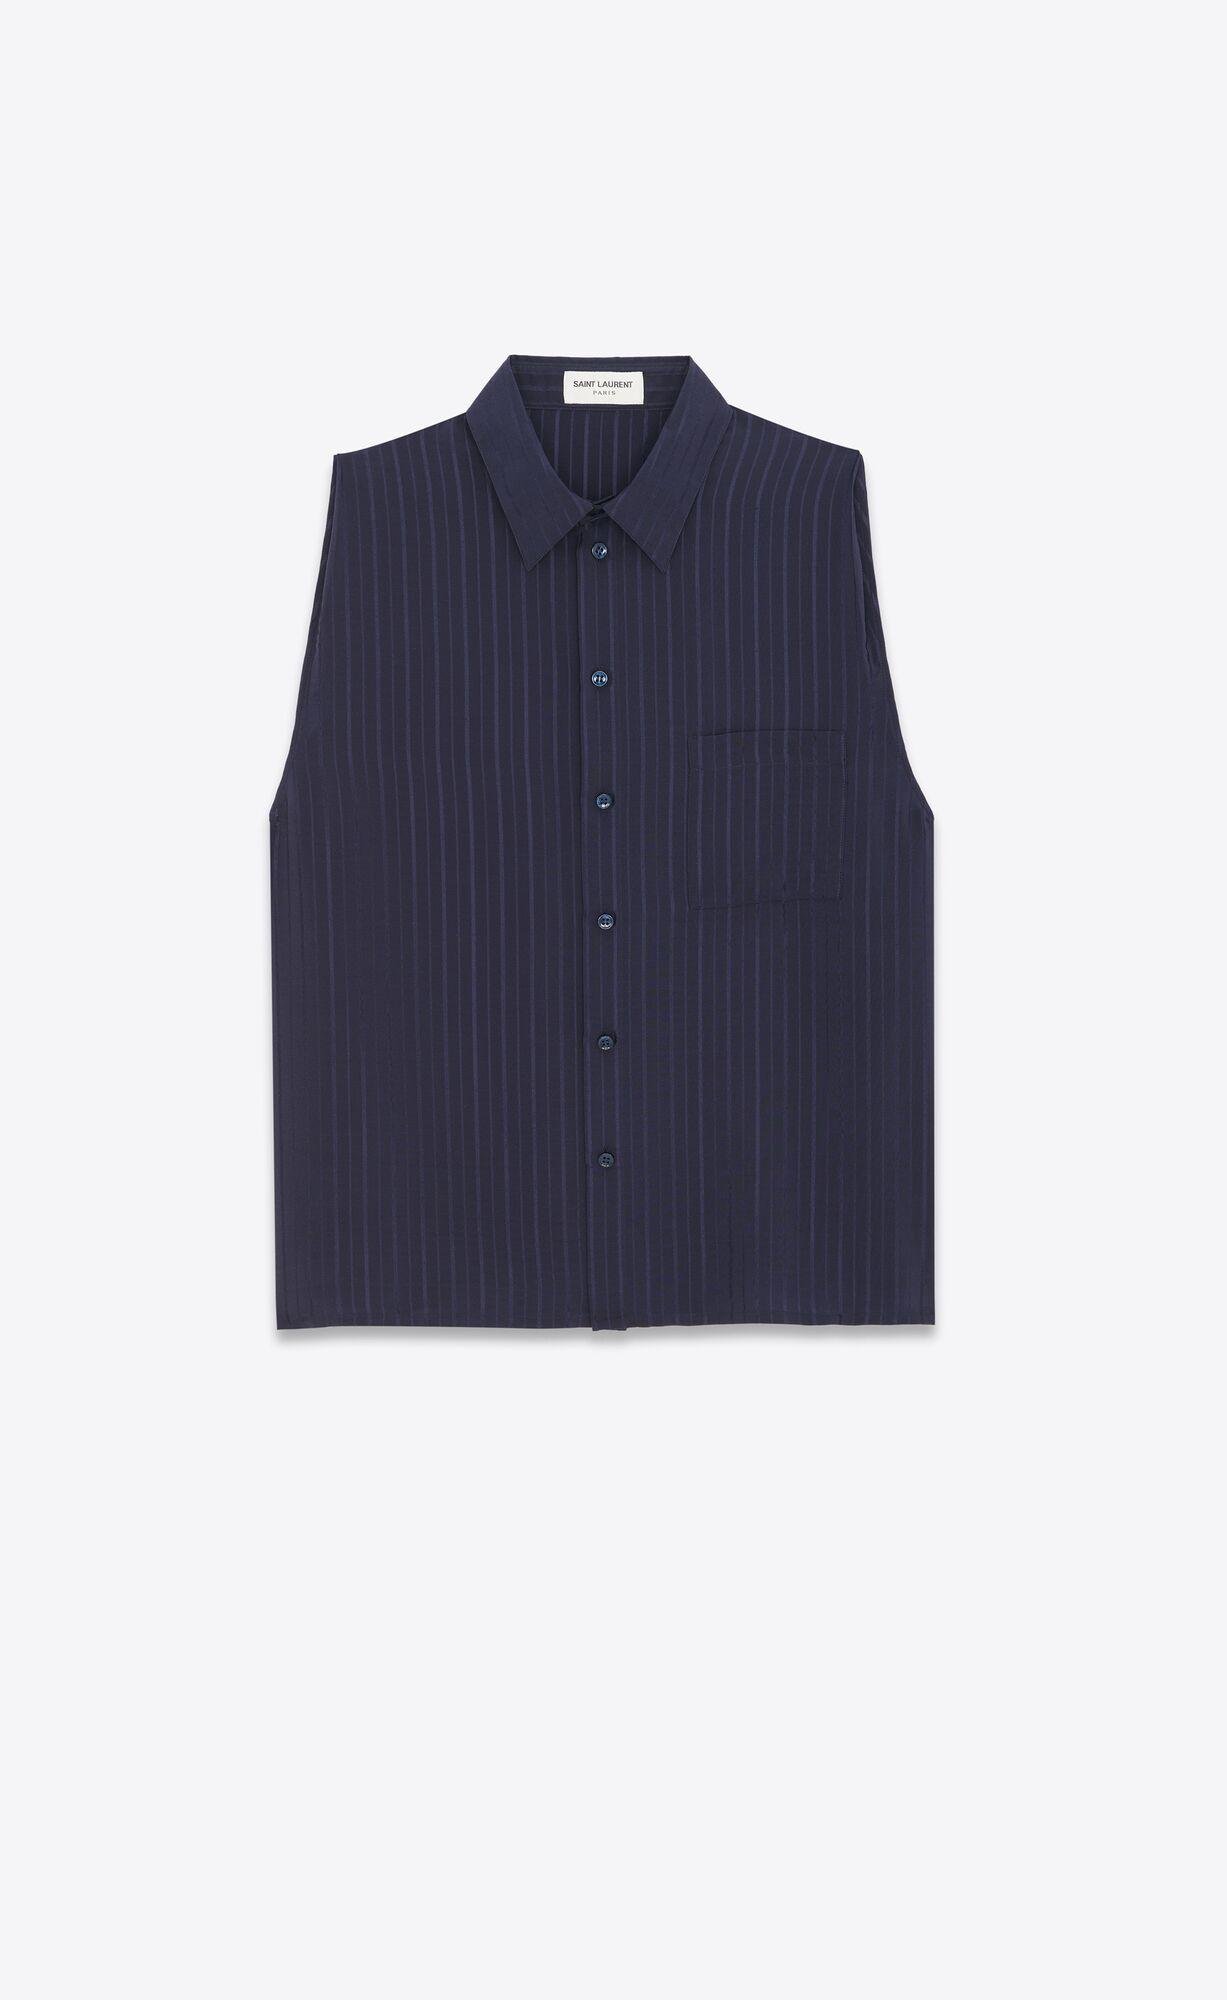 sleeveless shirt in striped silk crepe de chine by SAINT LAURENT